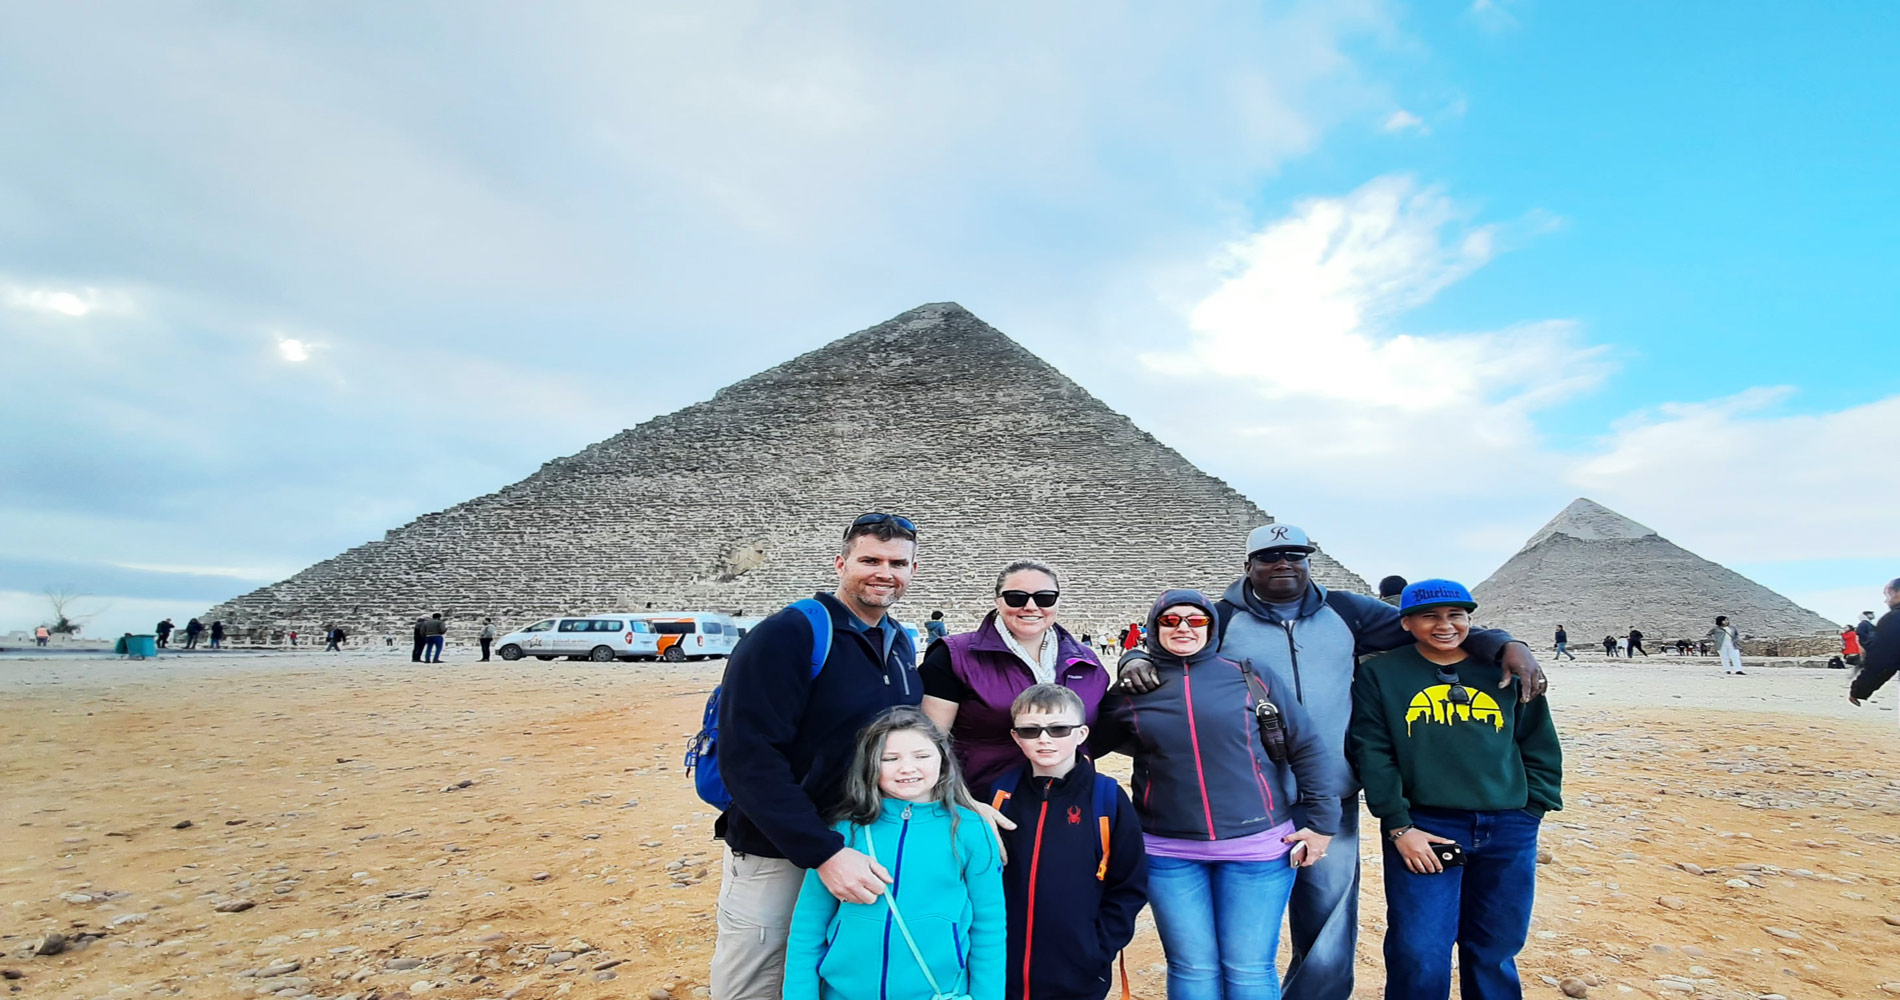 luxury Day Tour to Giza Pyramids Plateau and Egyptian Museum including Lunch